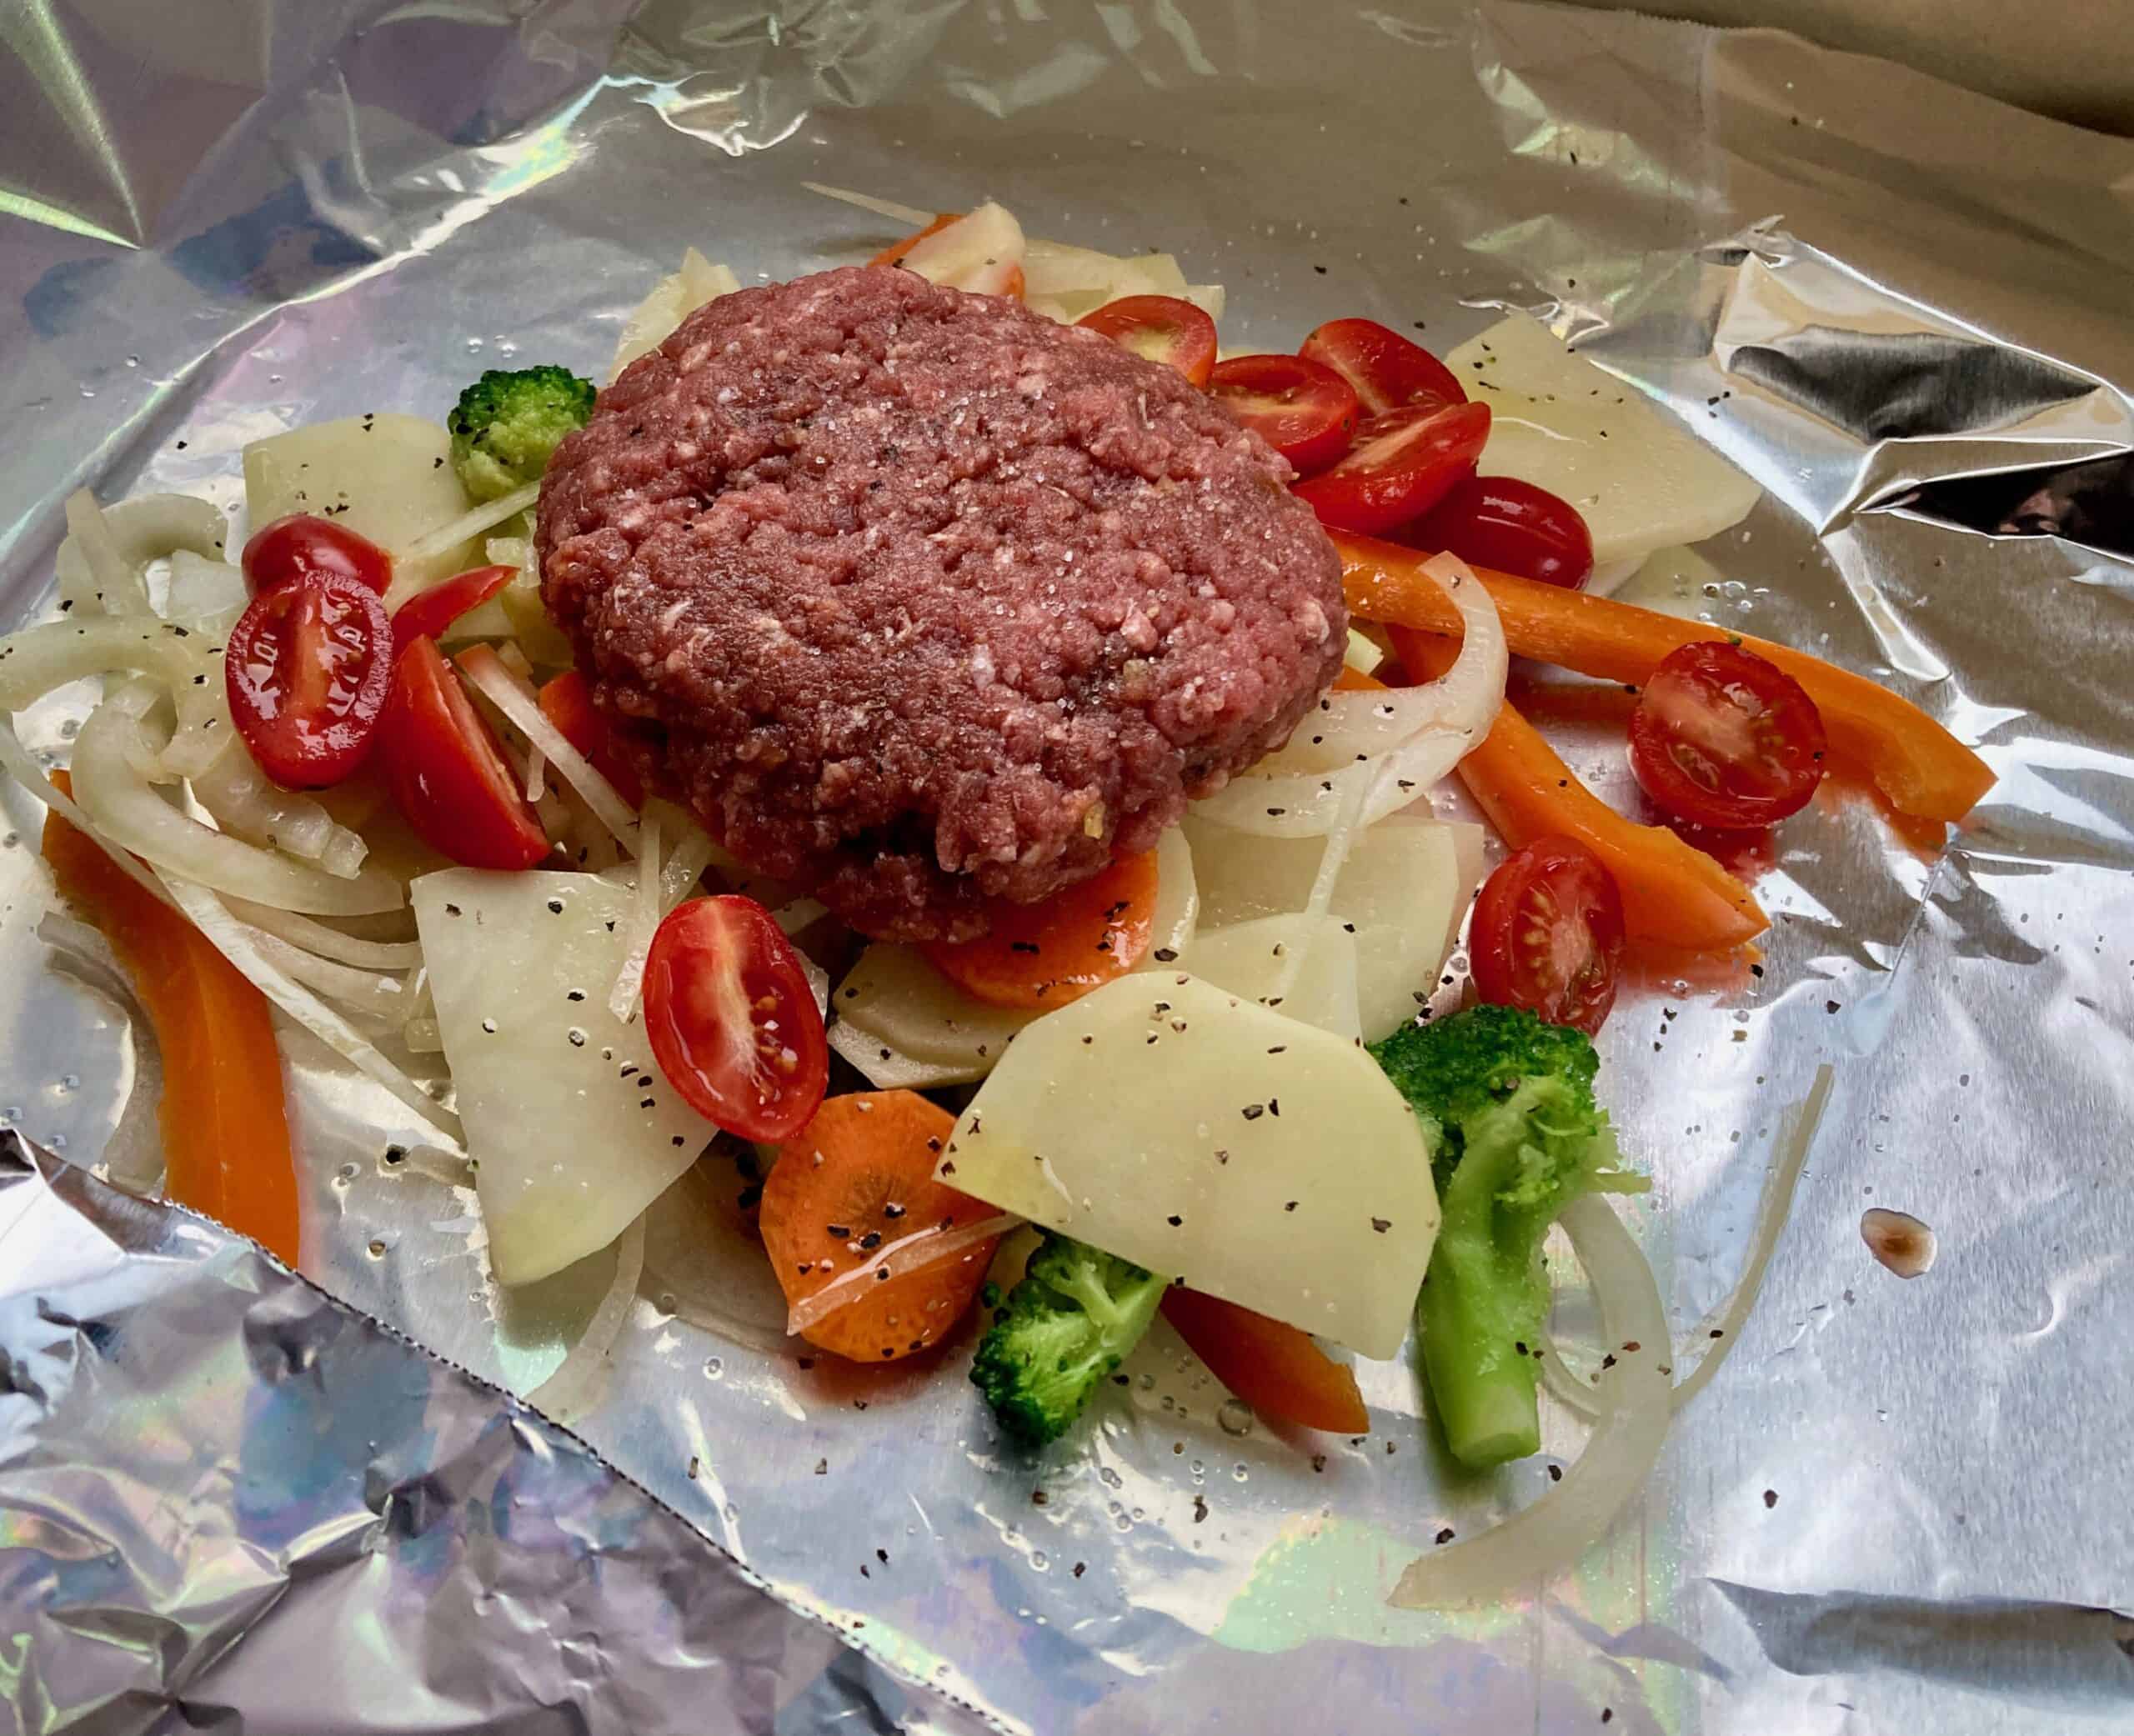 Assorted vegetables and ground beef patty on a sheet of heavy duty aluminum foil